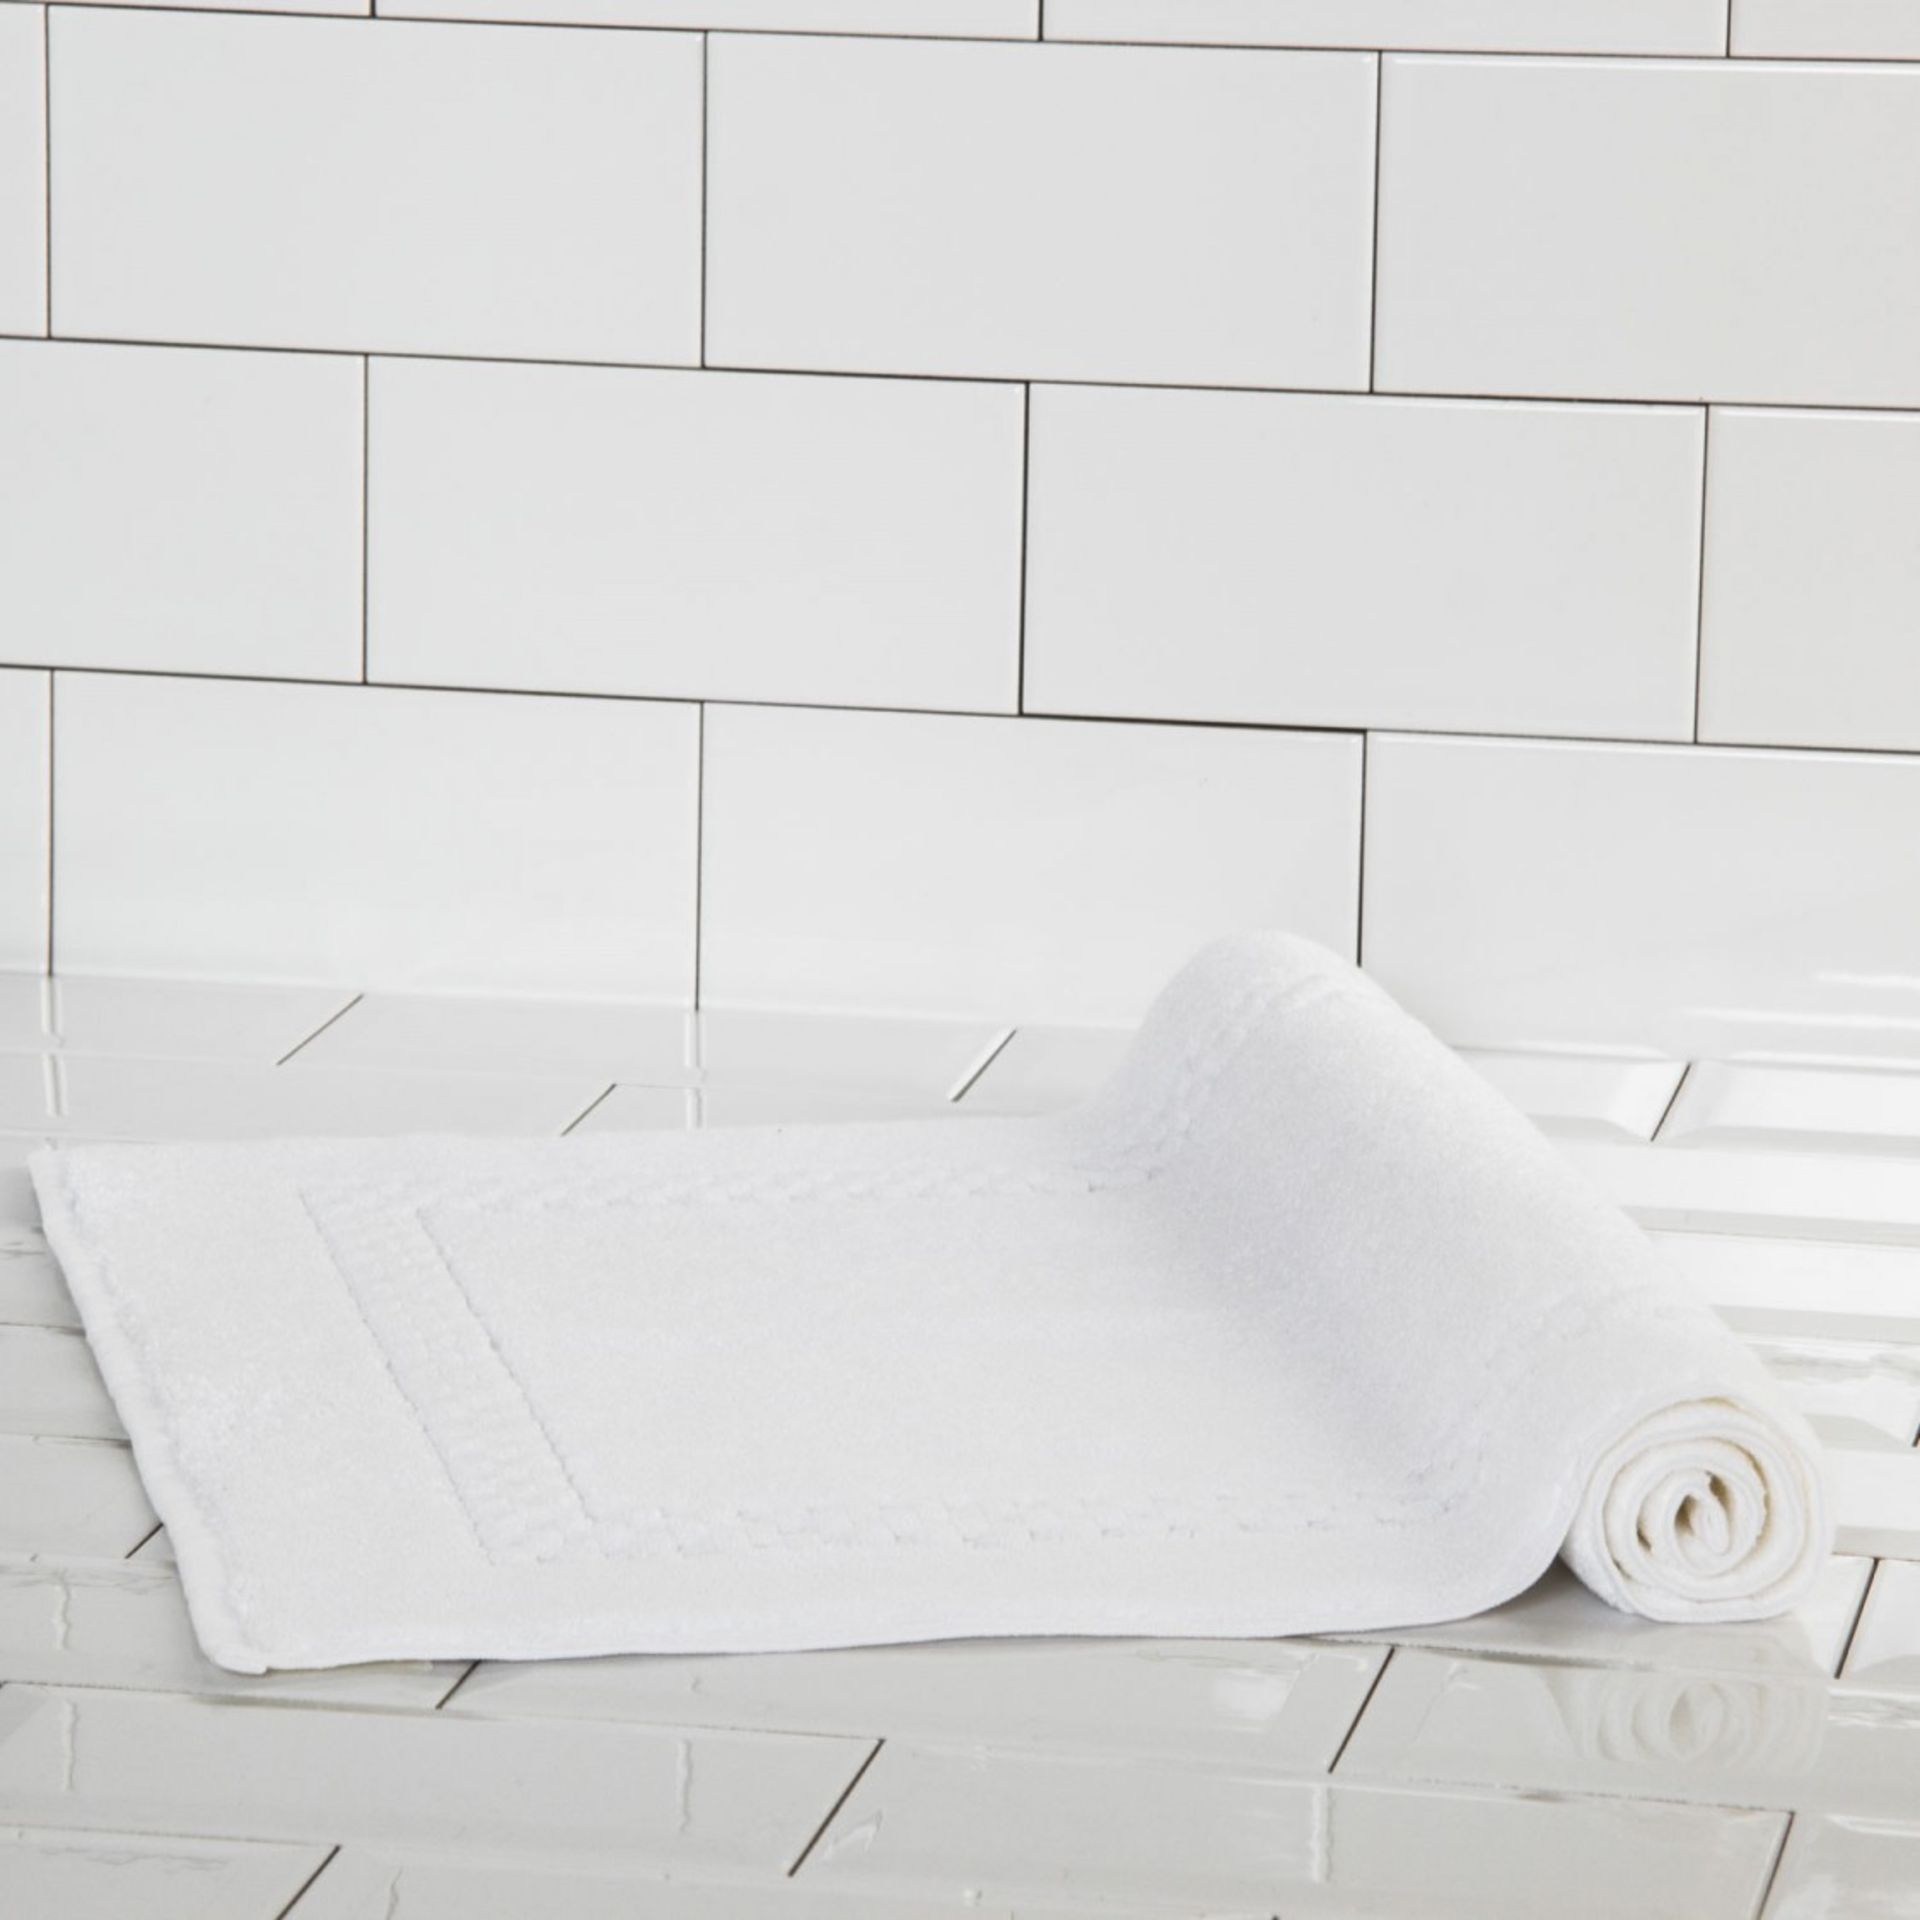 V *TRADE QTY* Brand New Frette Luxury Italian Made White Bath Mat 100% Open Ended High Quality